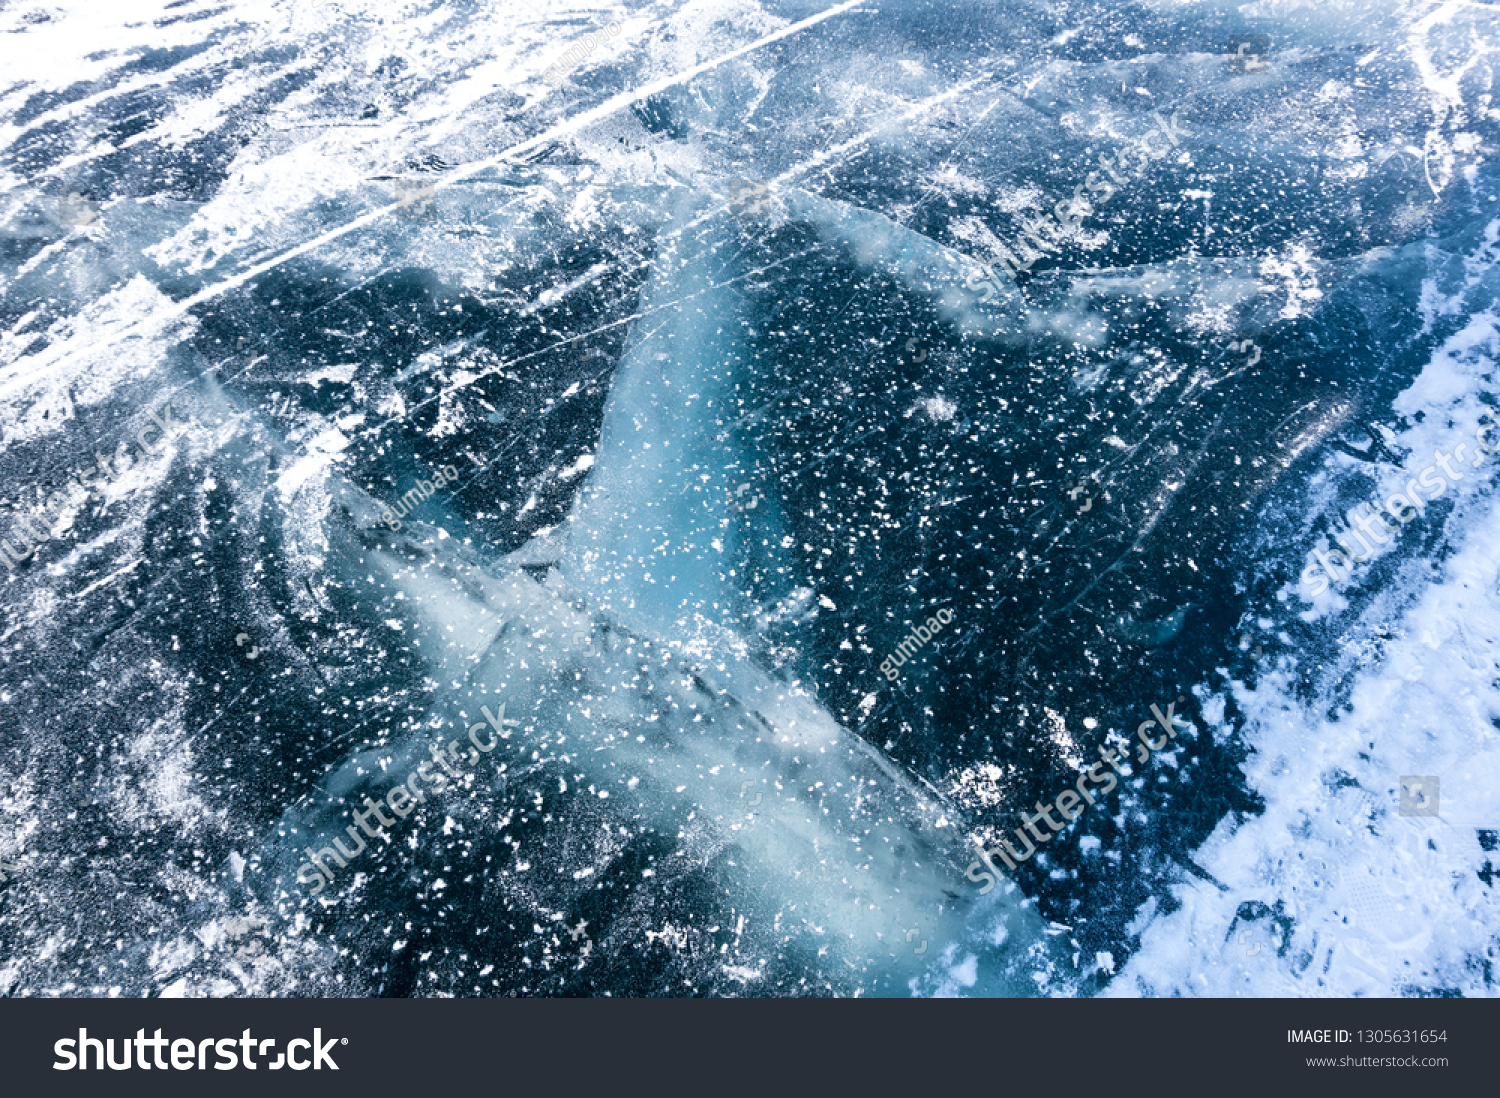 Ice of Lake Baikal, the deepest and largest freshwater lake by volume in the world, located in southern Siberia, Russia #1305631654